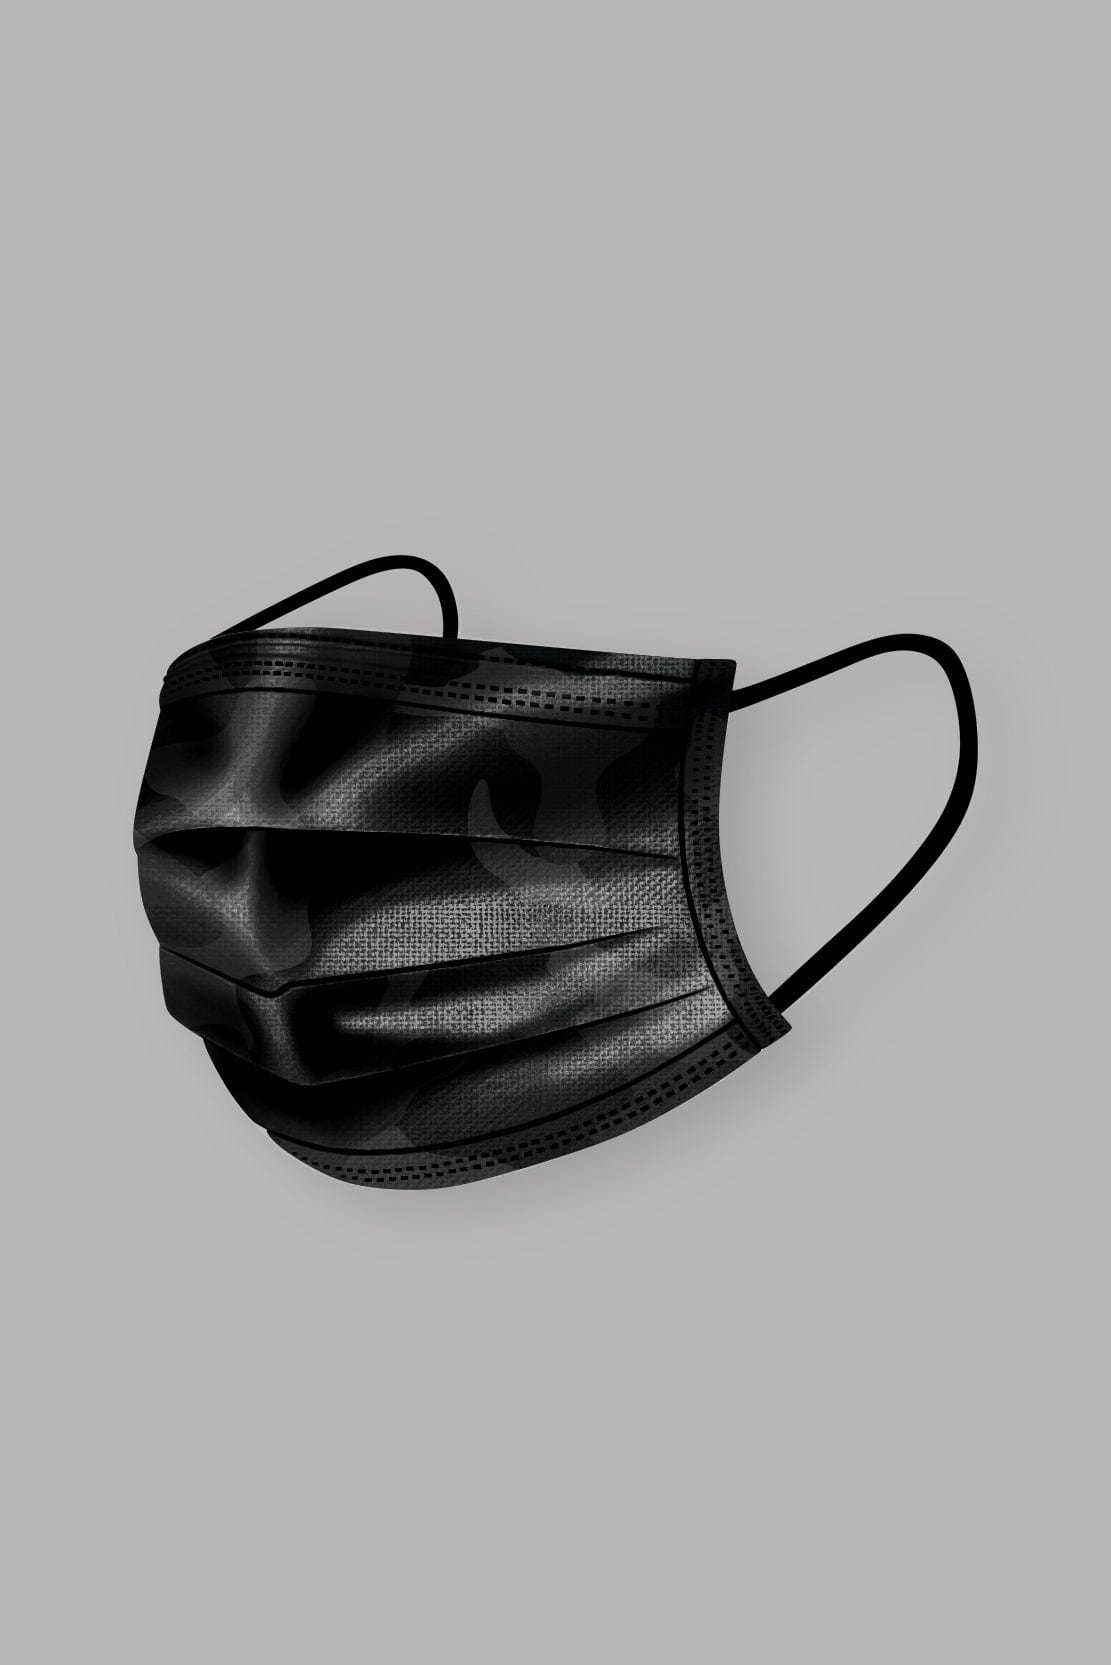 Stylish Black Camo Pleated face mask, with soft black ear loops and high quality fabric. 